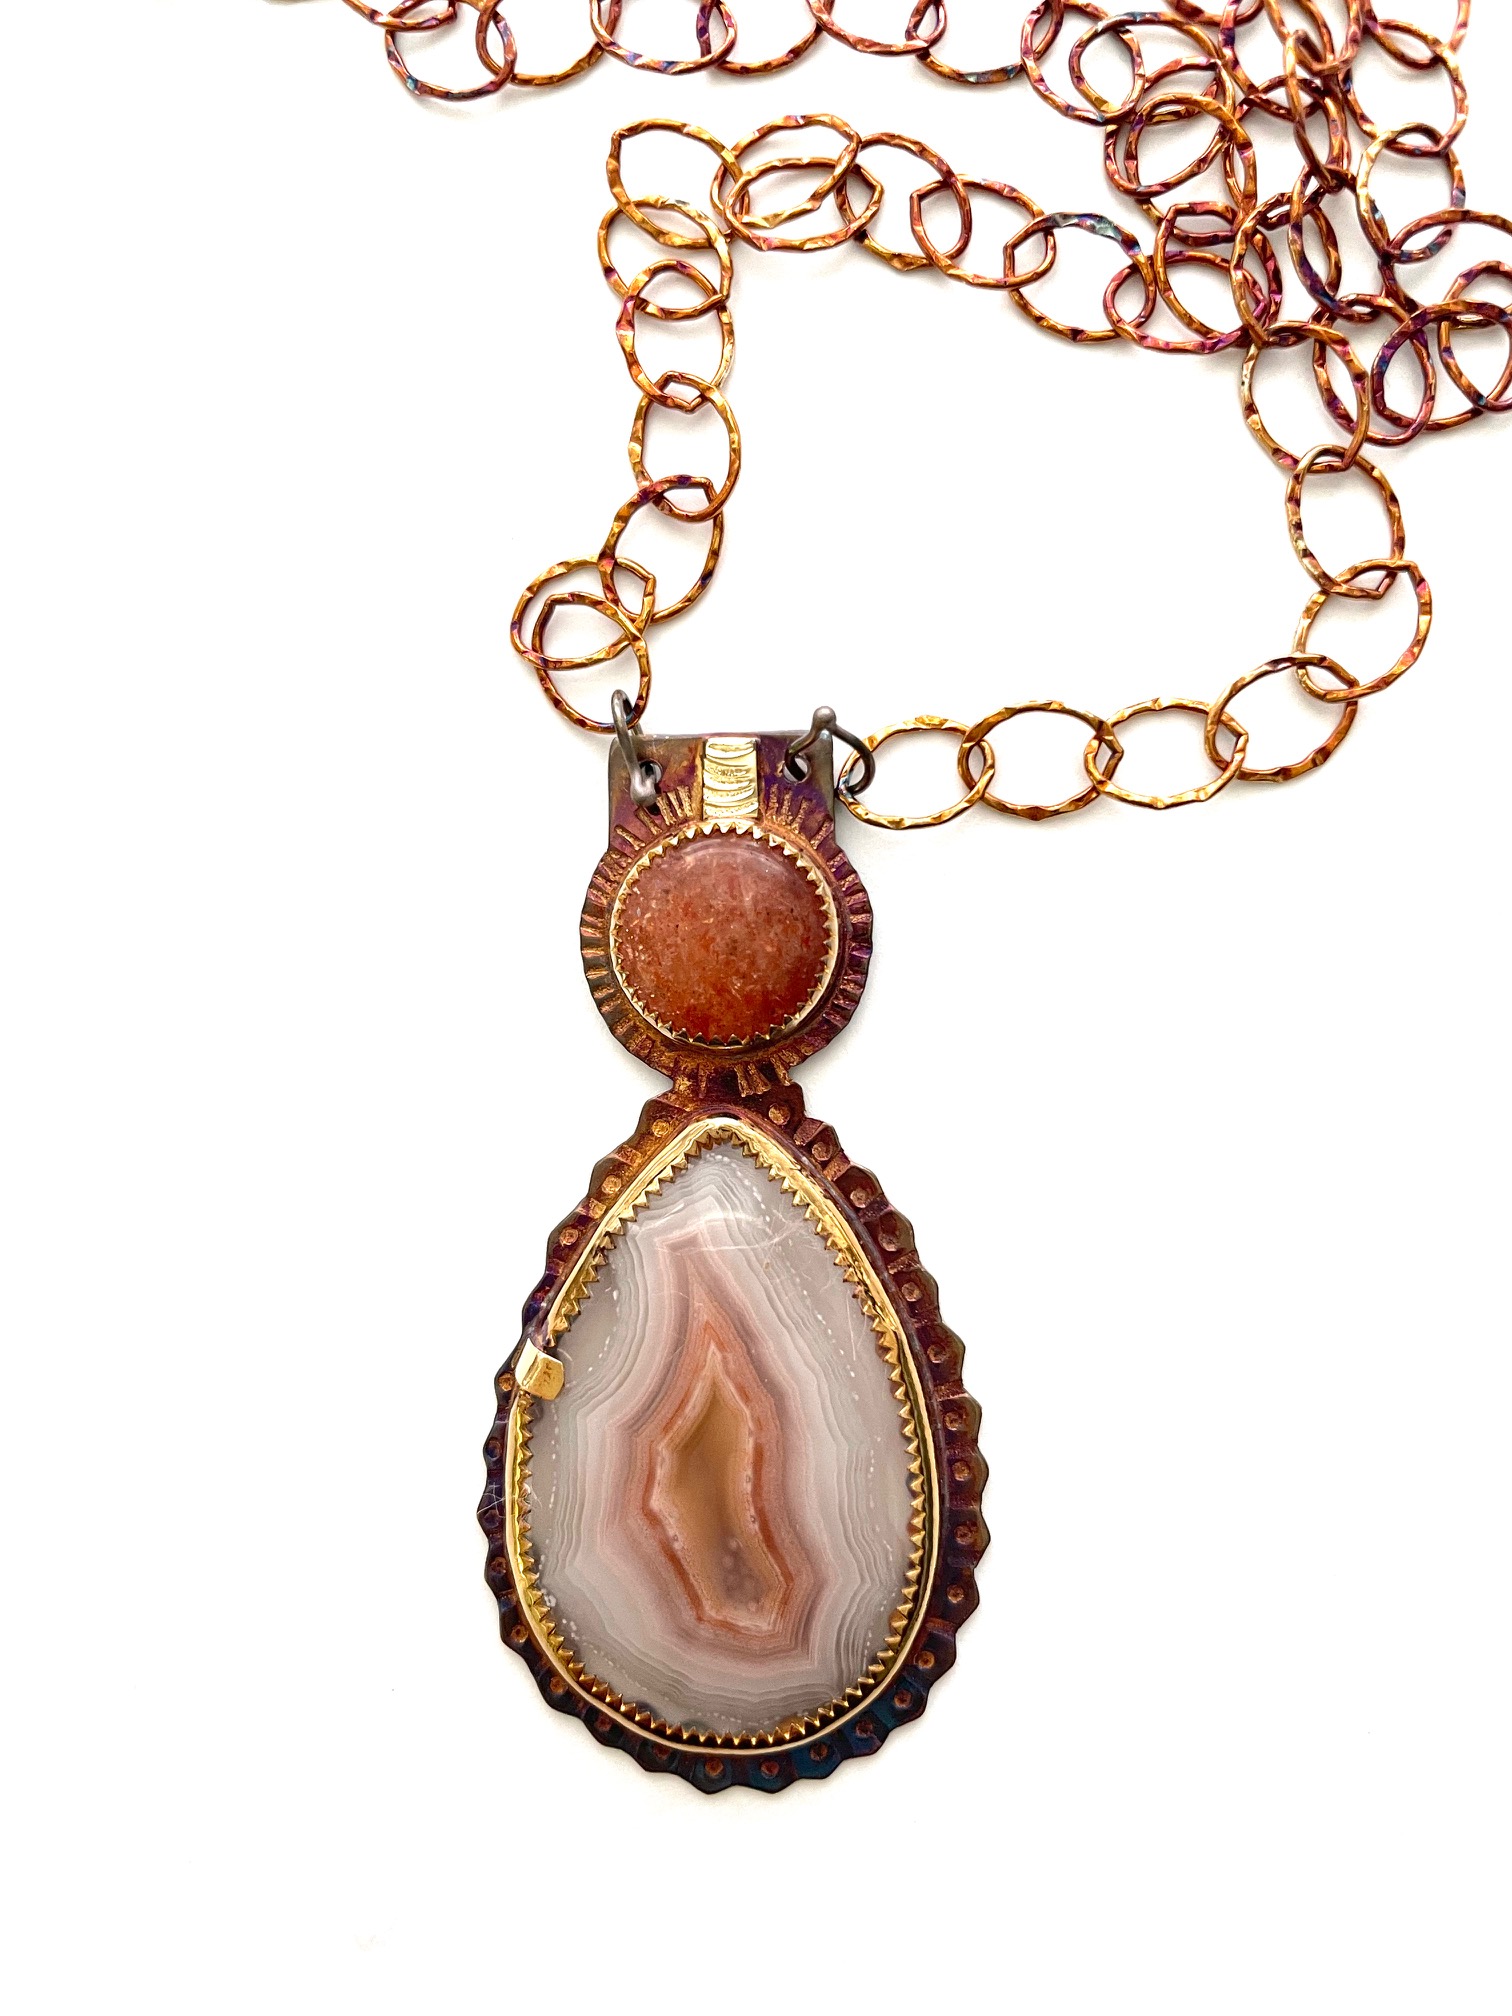 Sterling Silver, 22k Gold, Sunstone and Laguna Beach Agate Necklace, 18 1/2